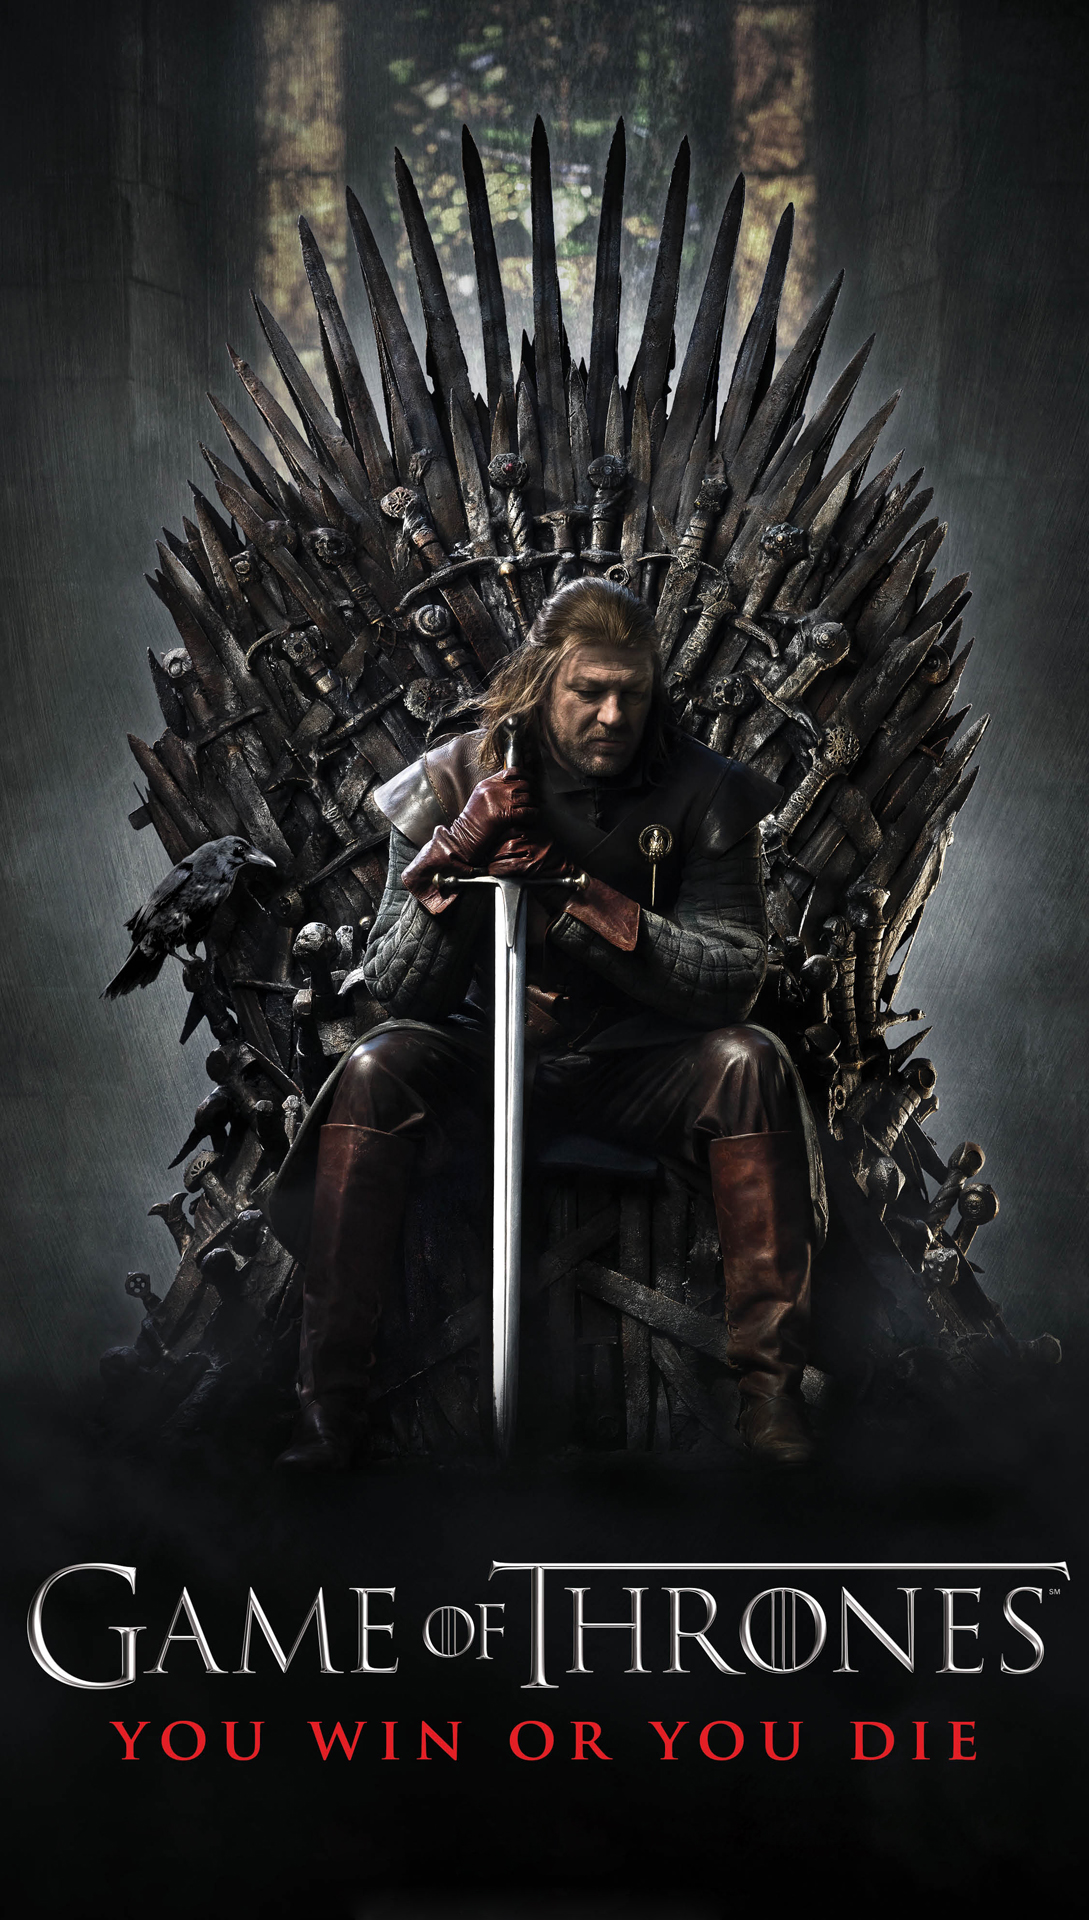 game of thrones handy wallpaper,movie,darkness,album cover,poster,chair